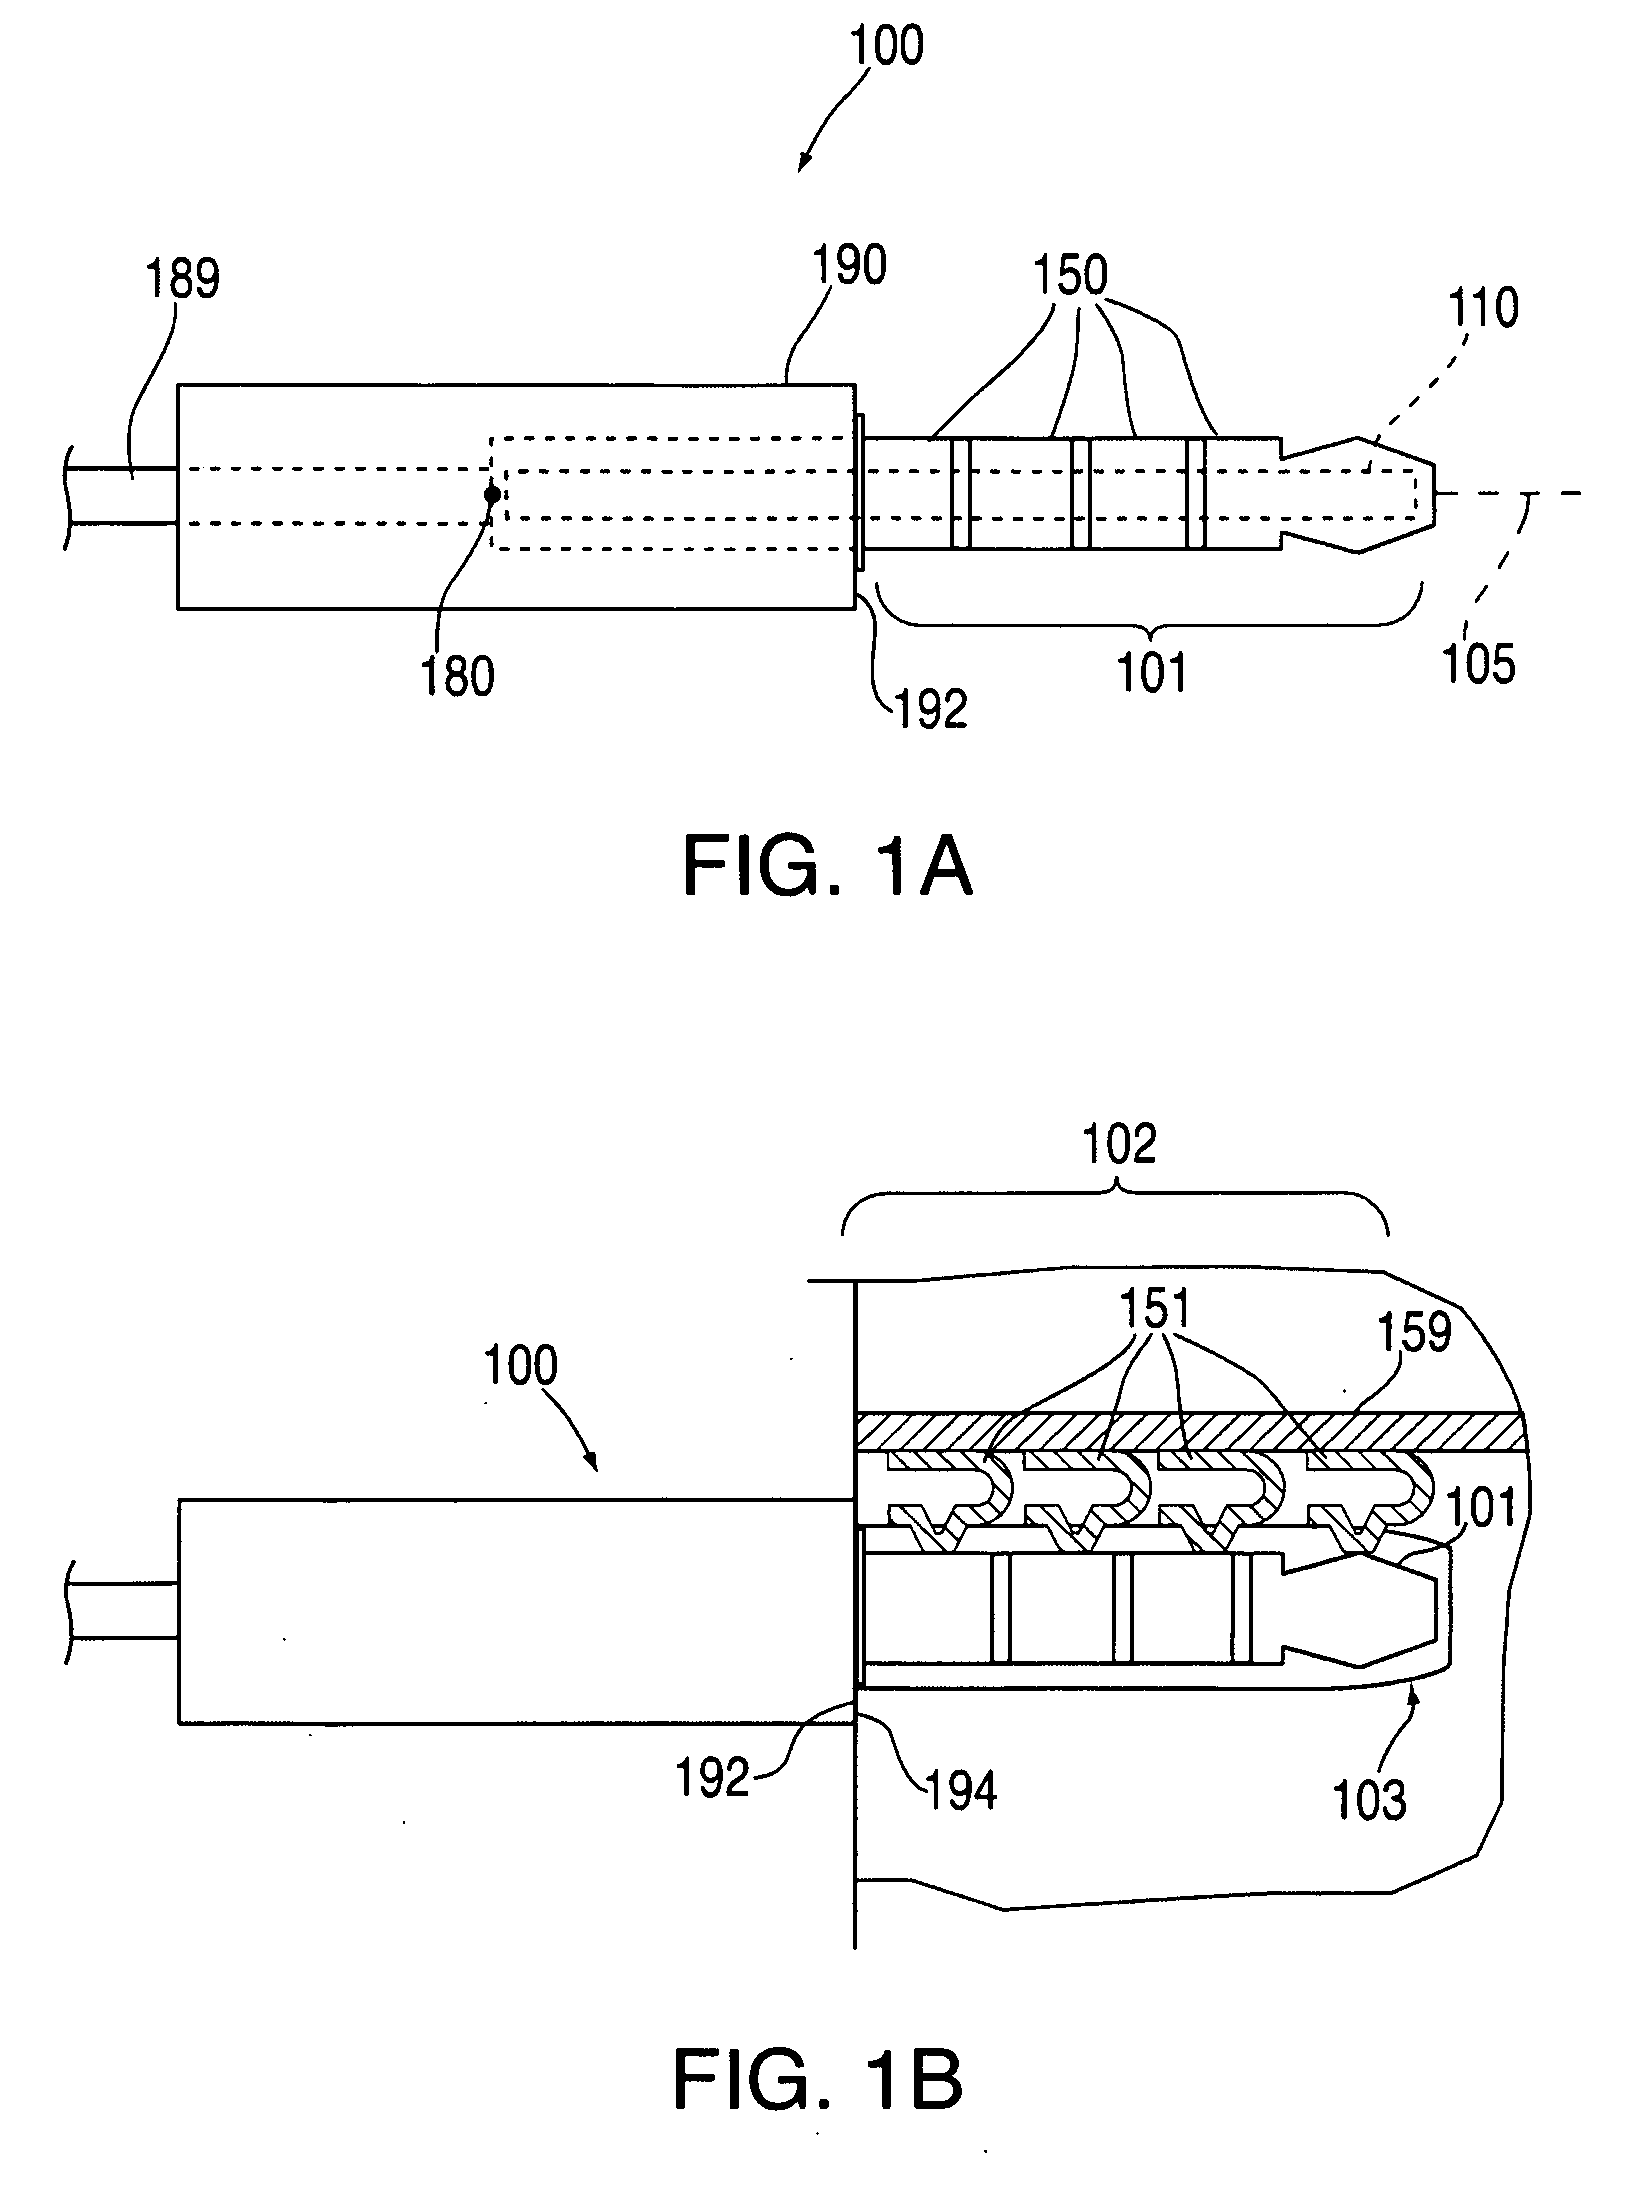 Audio plug with core structural member